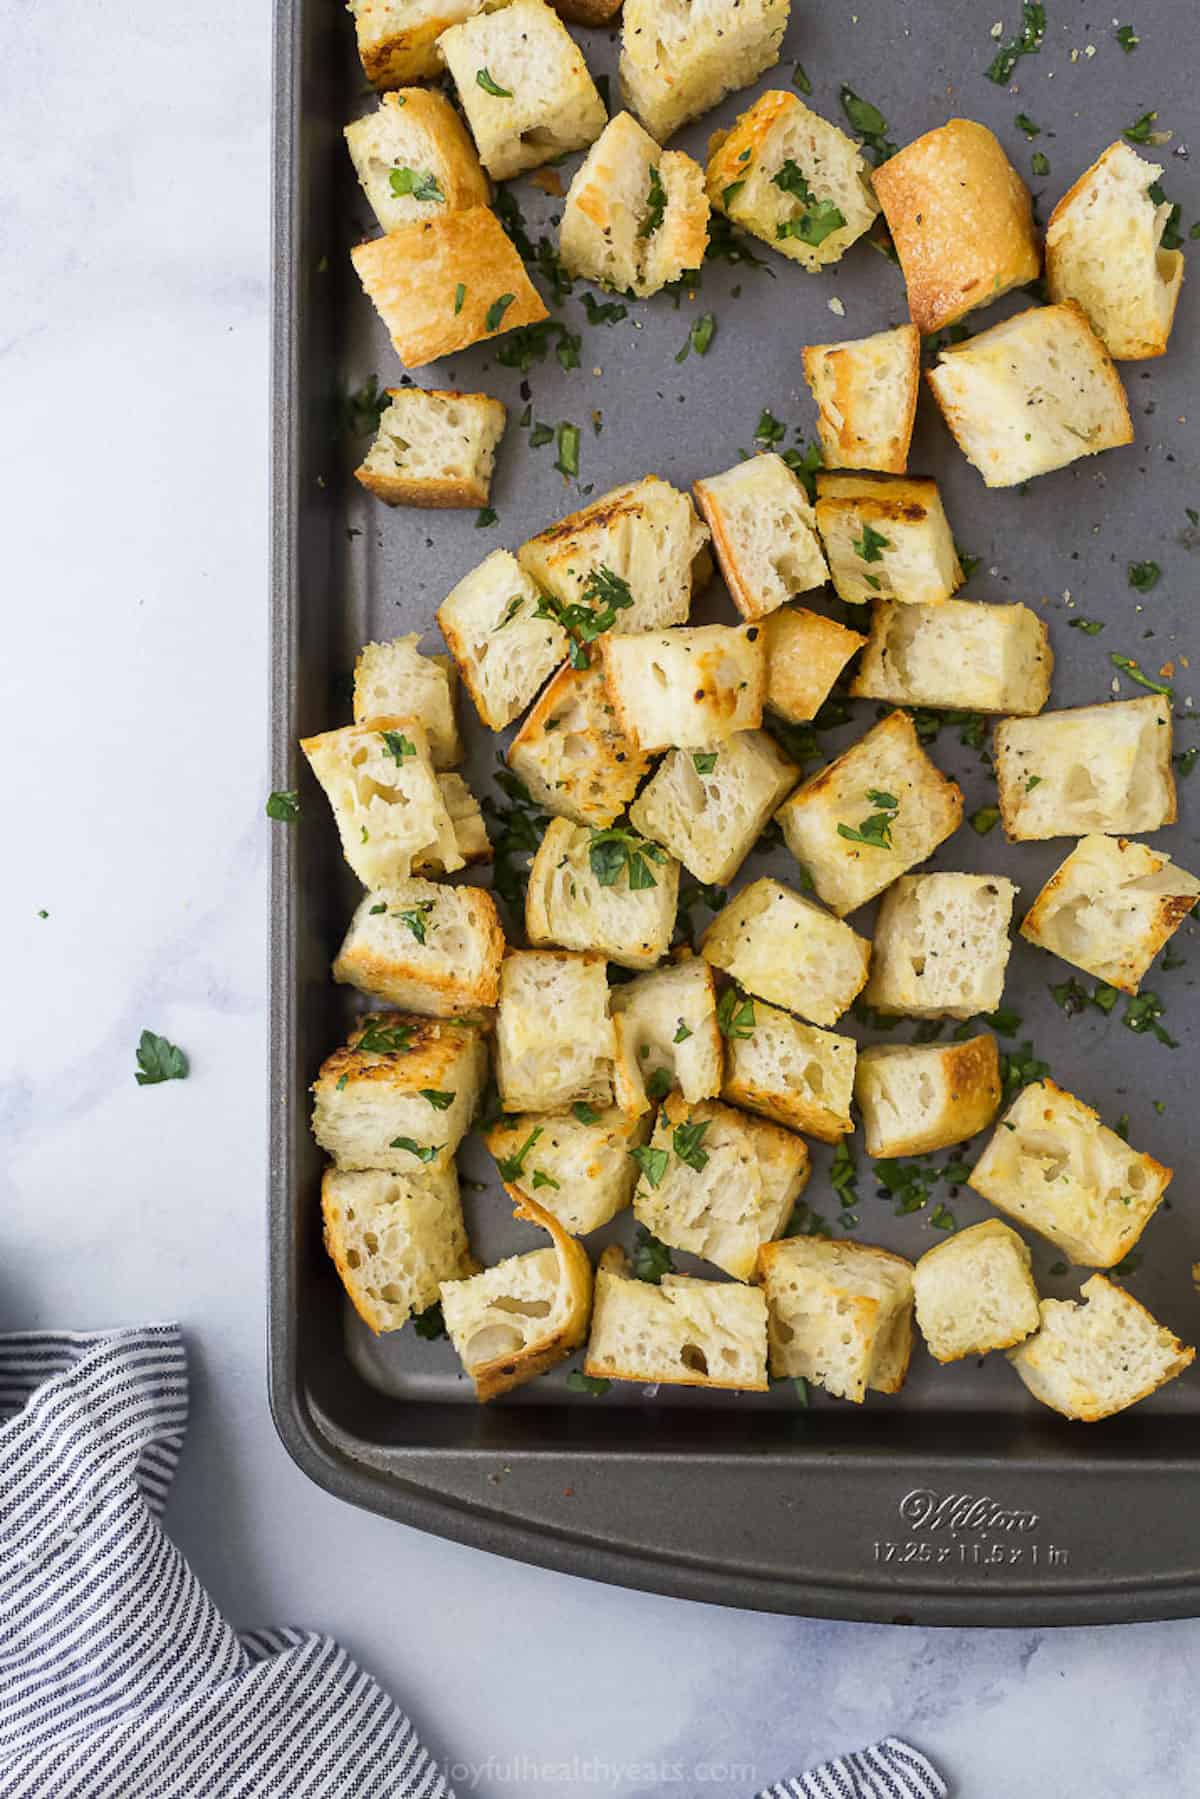 Homemade croutons on a nonstick baking pan with a striped kitchen towel beside it